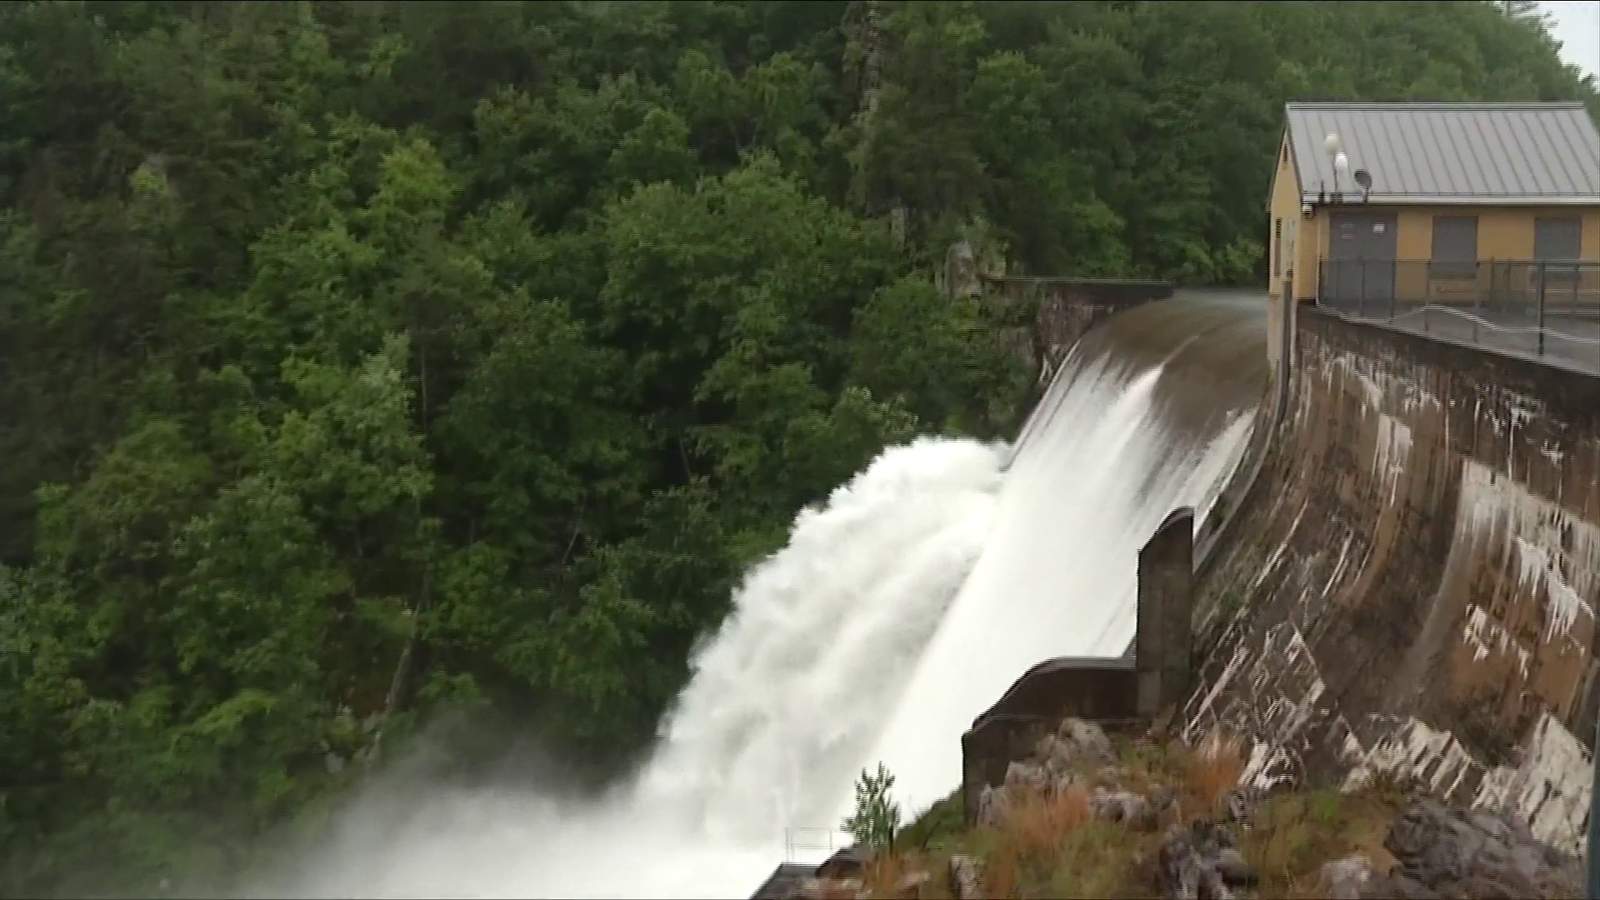 Officials say no danger to public as two feet of water flow over Carvins Cove dam